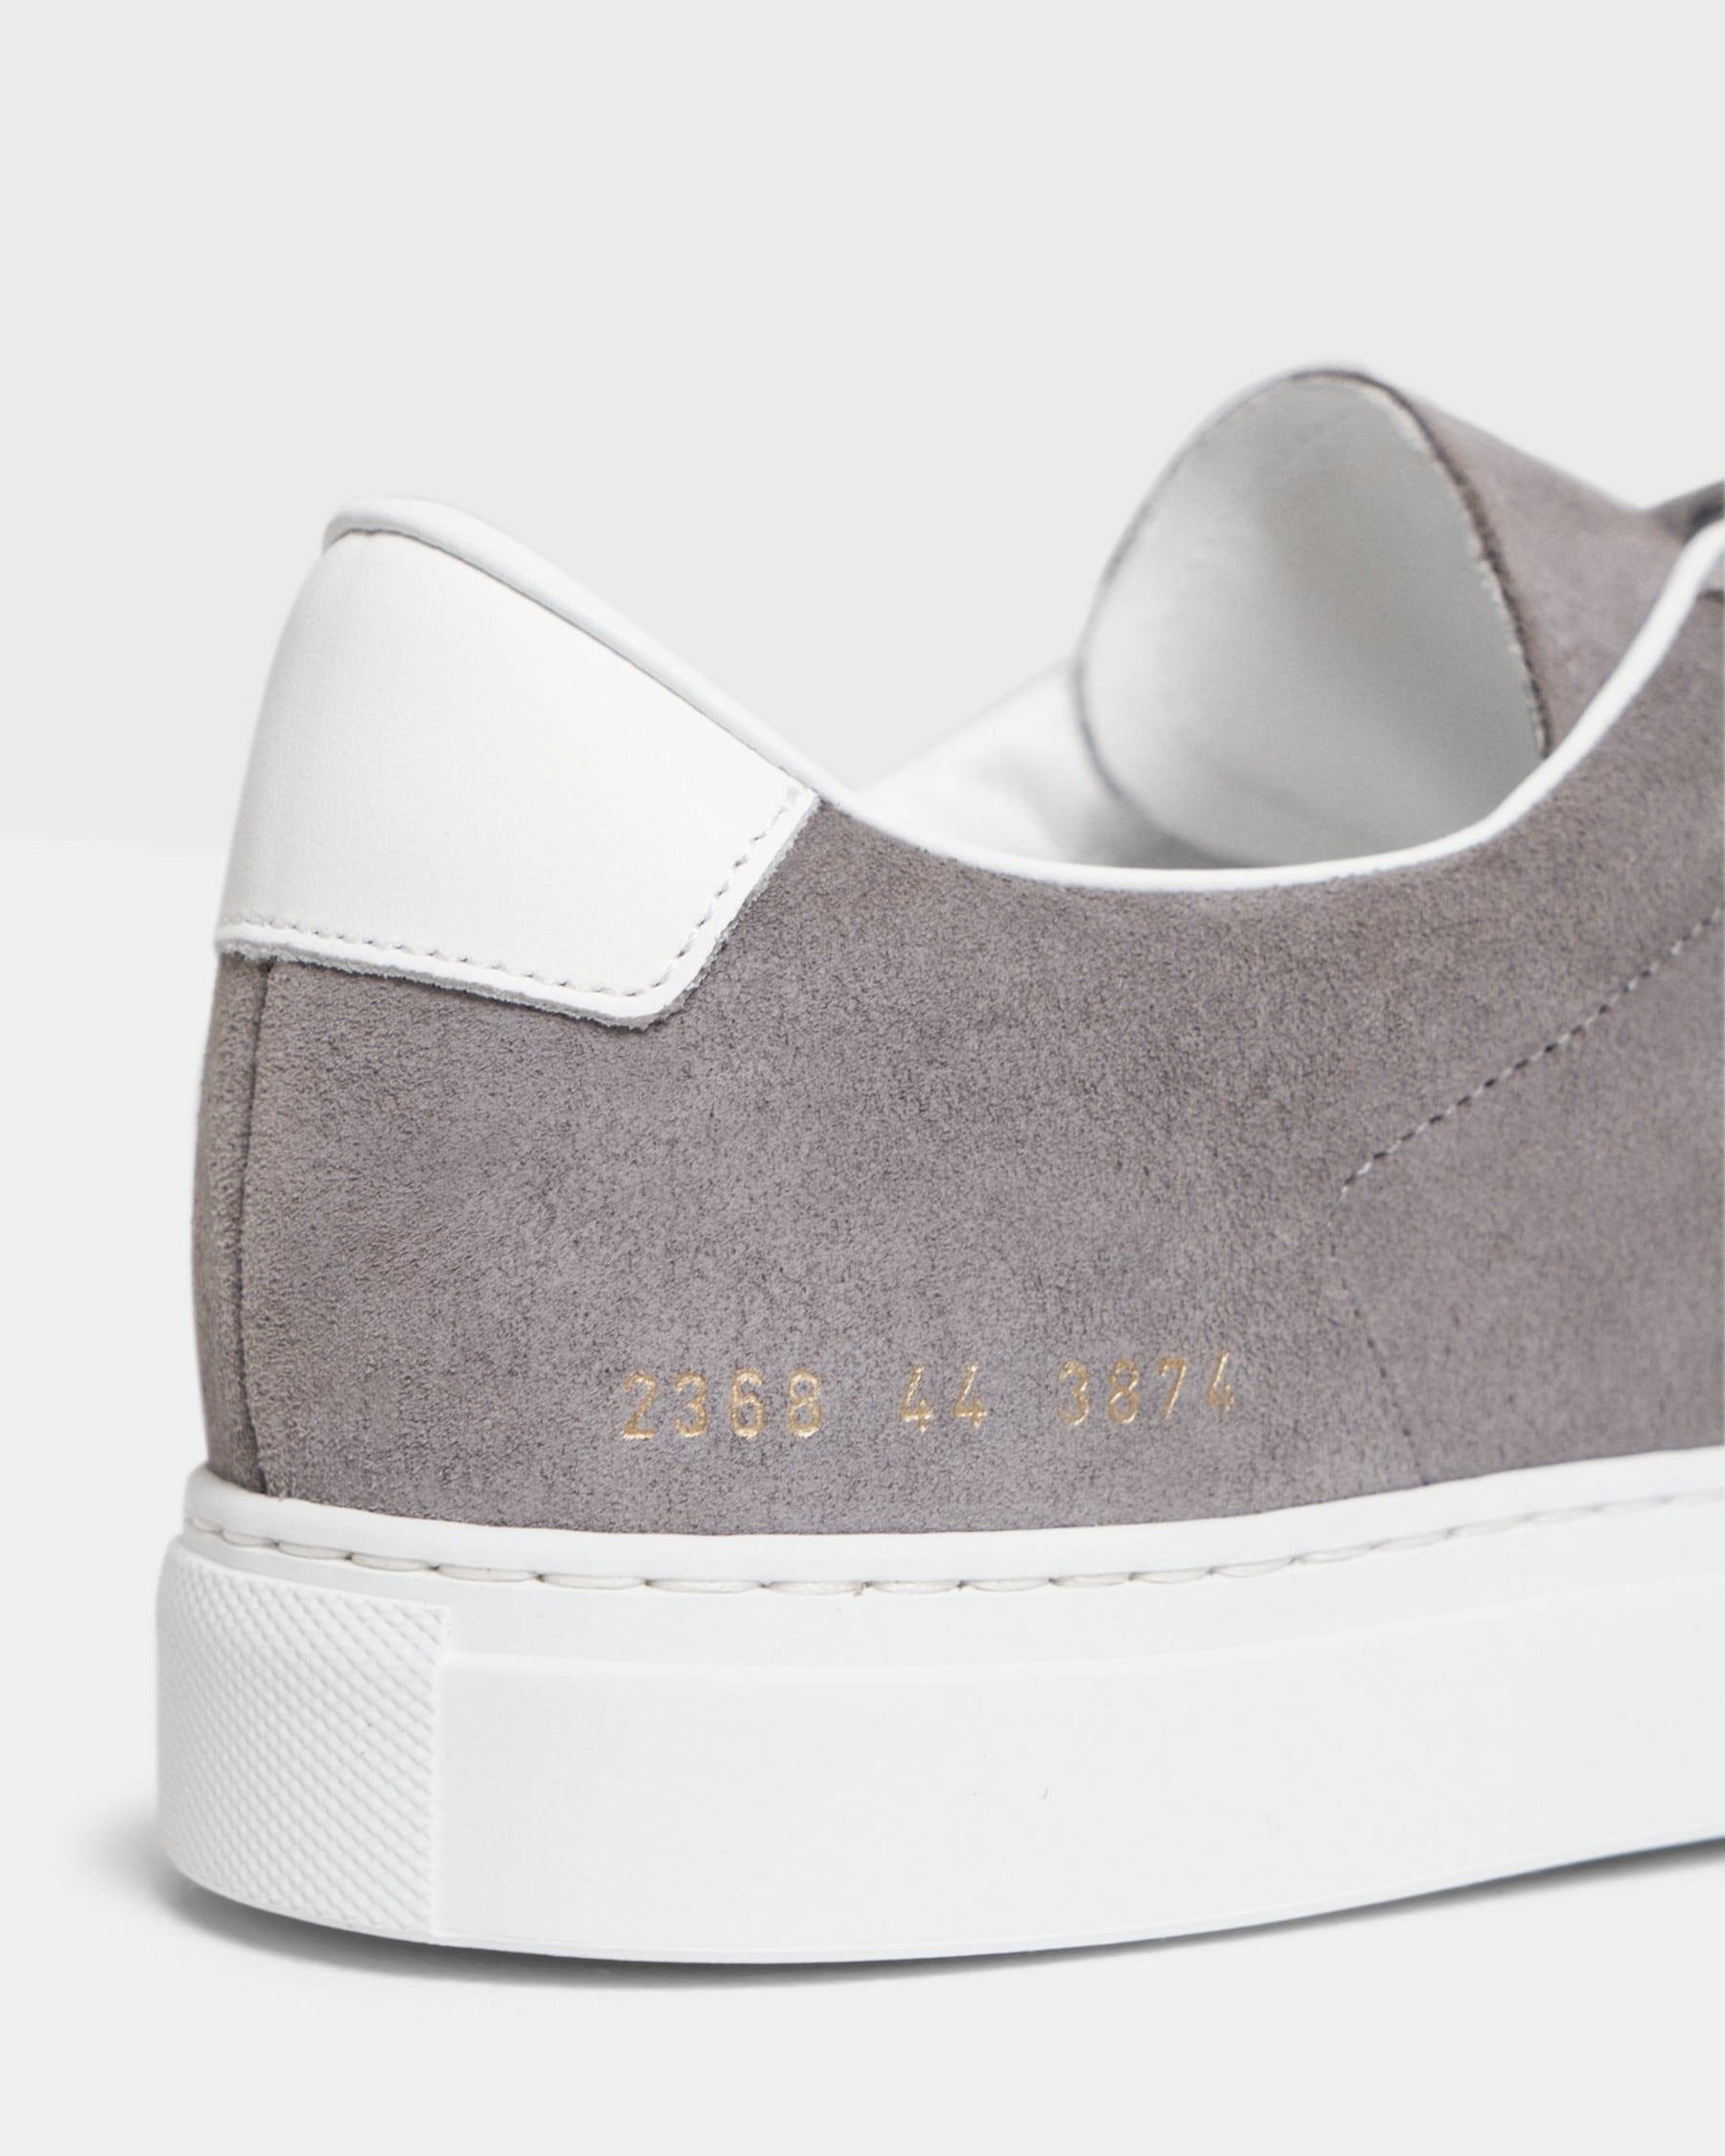 Common Projects Men’s Retro Low-Top Sneakers